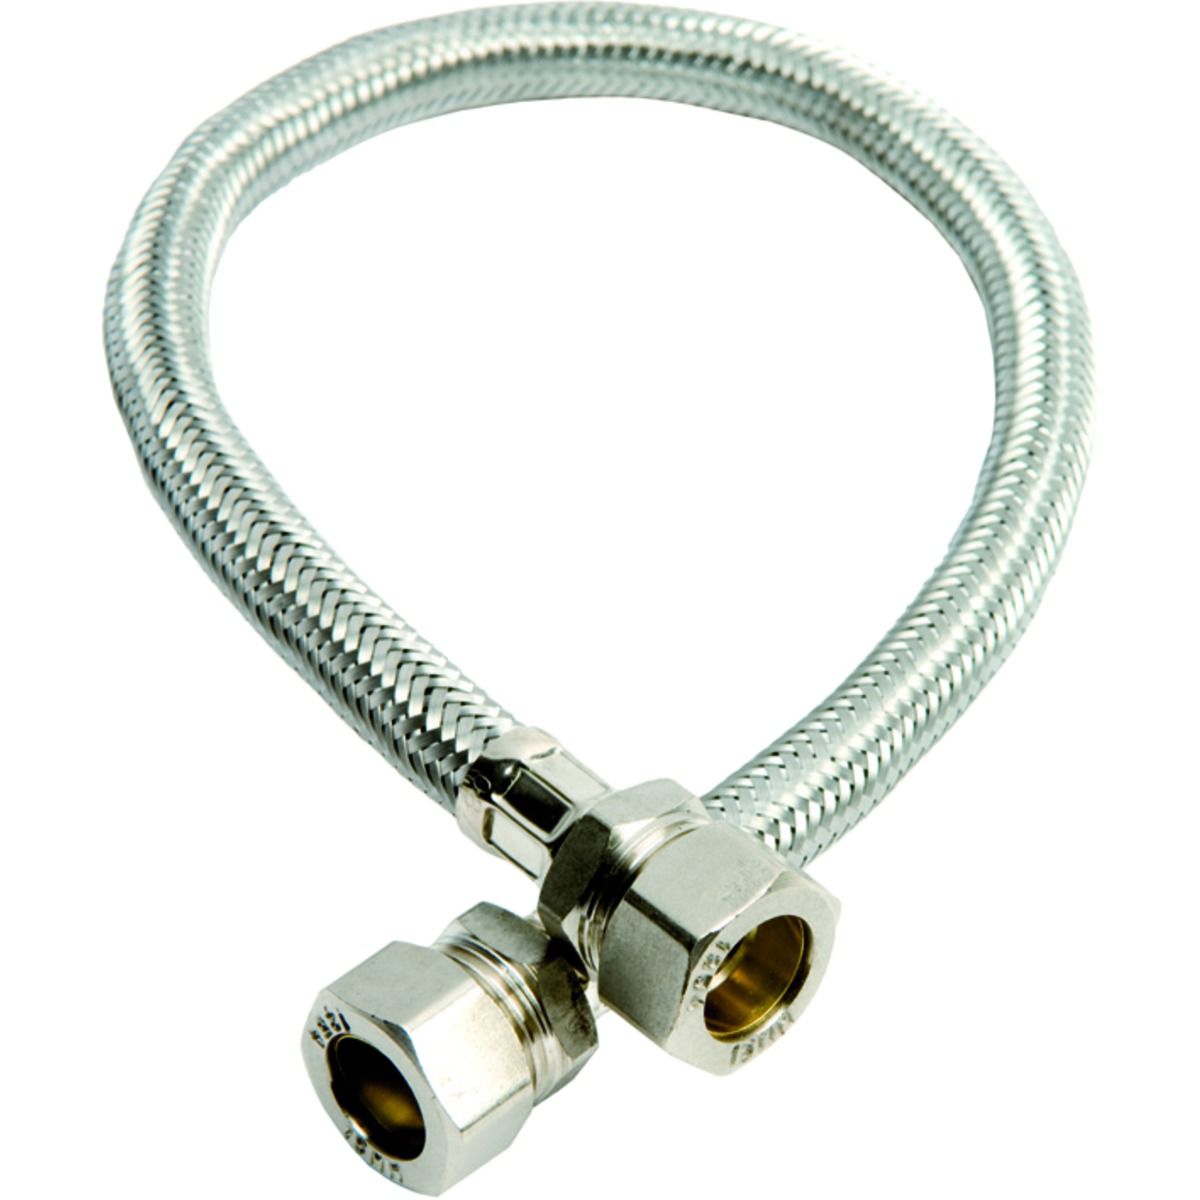 Image of Primaflow Flexible Compression Tap Connector - 15 X 15 X 500mm